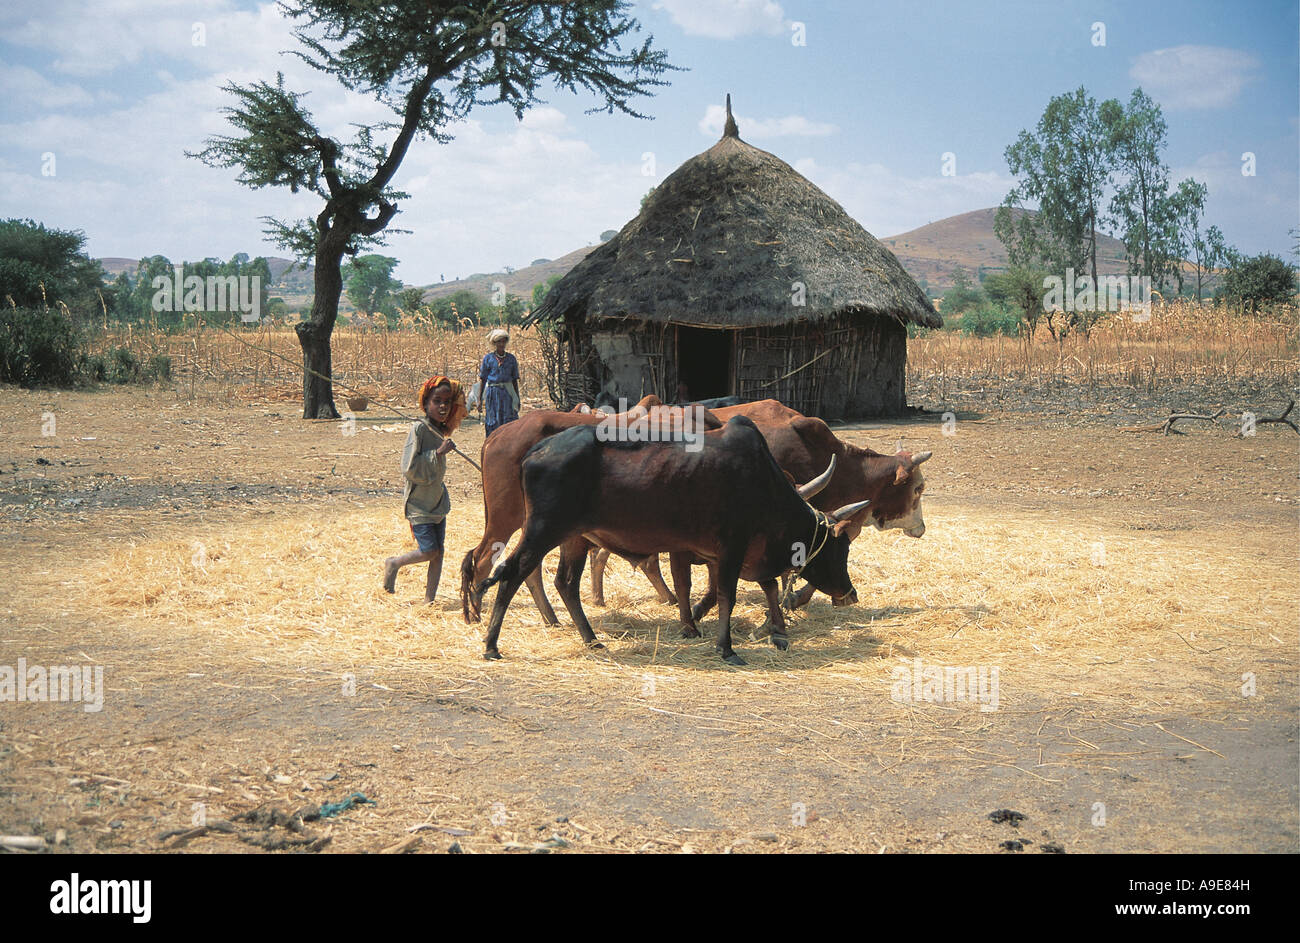 A young boy using cattle to thresh grain Mekele Ethiopia Stock Photo